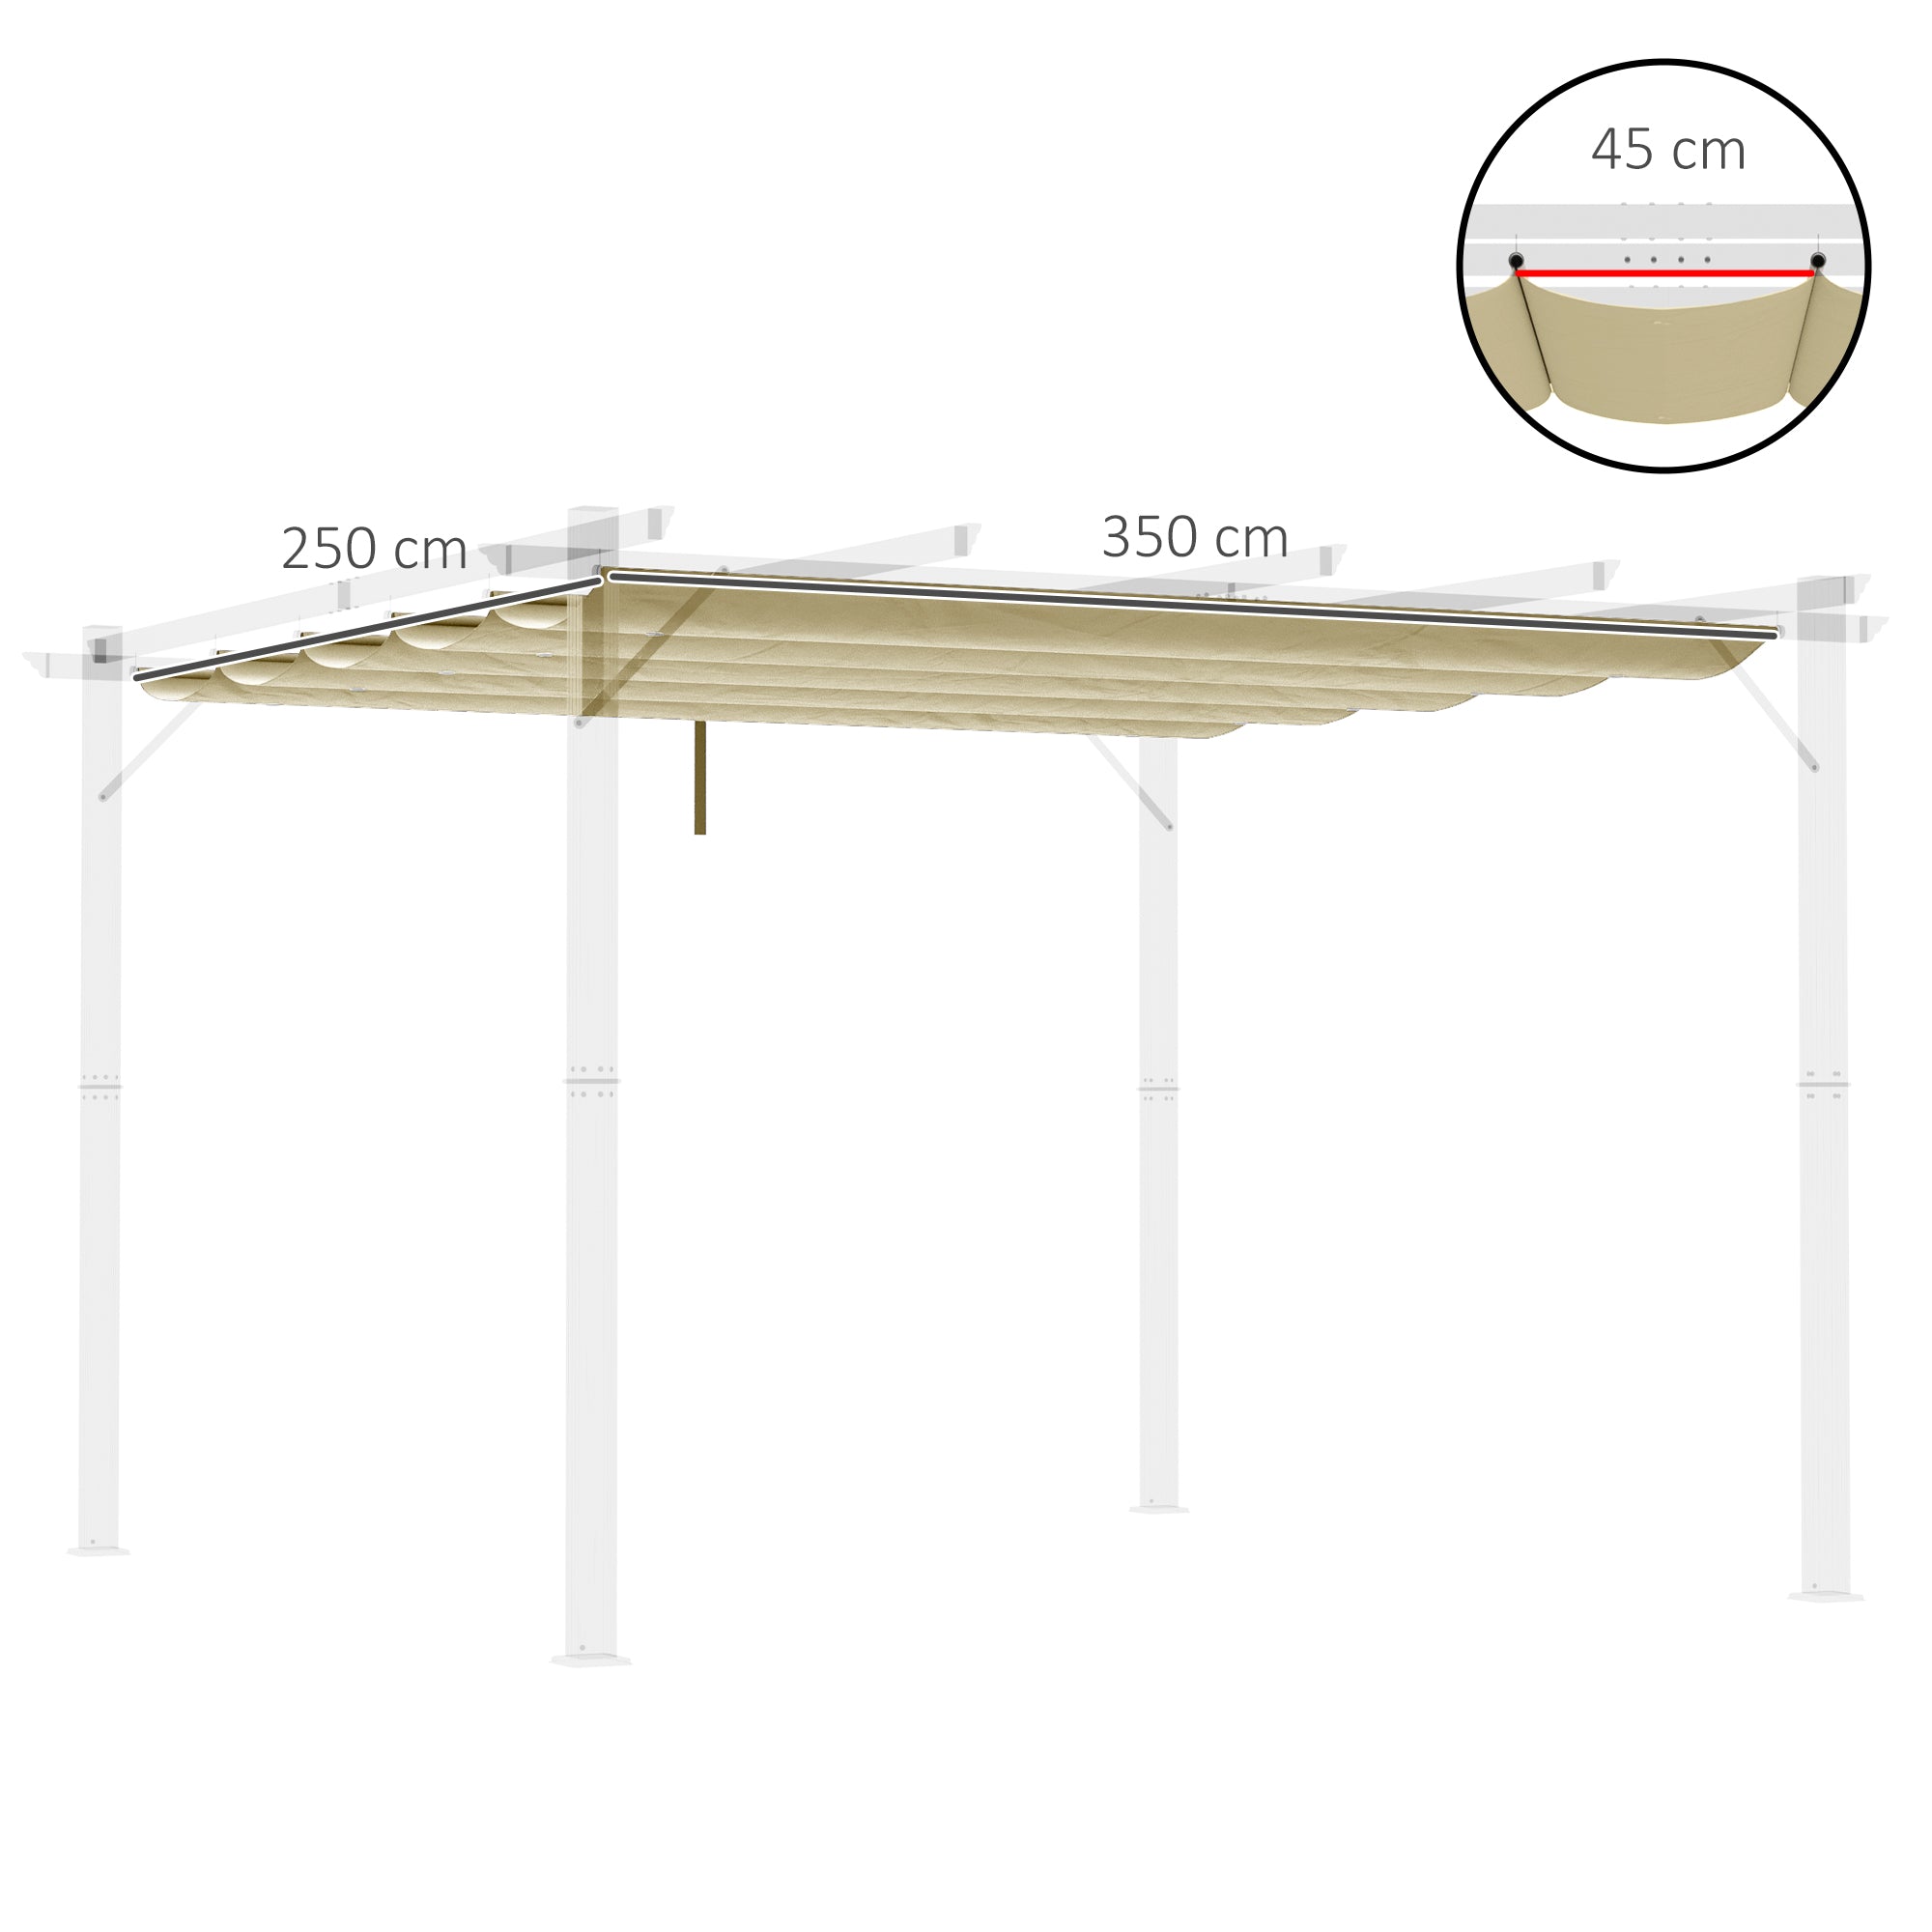 Outsunny Retractable Pergola Shade Cover, Replacement Canopy for 4 x 3 (m) Pergola, Retractable Roof, Beige